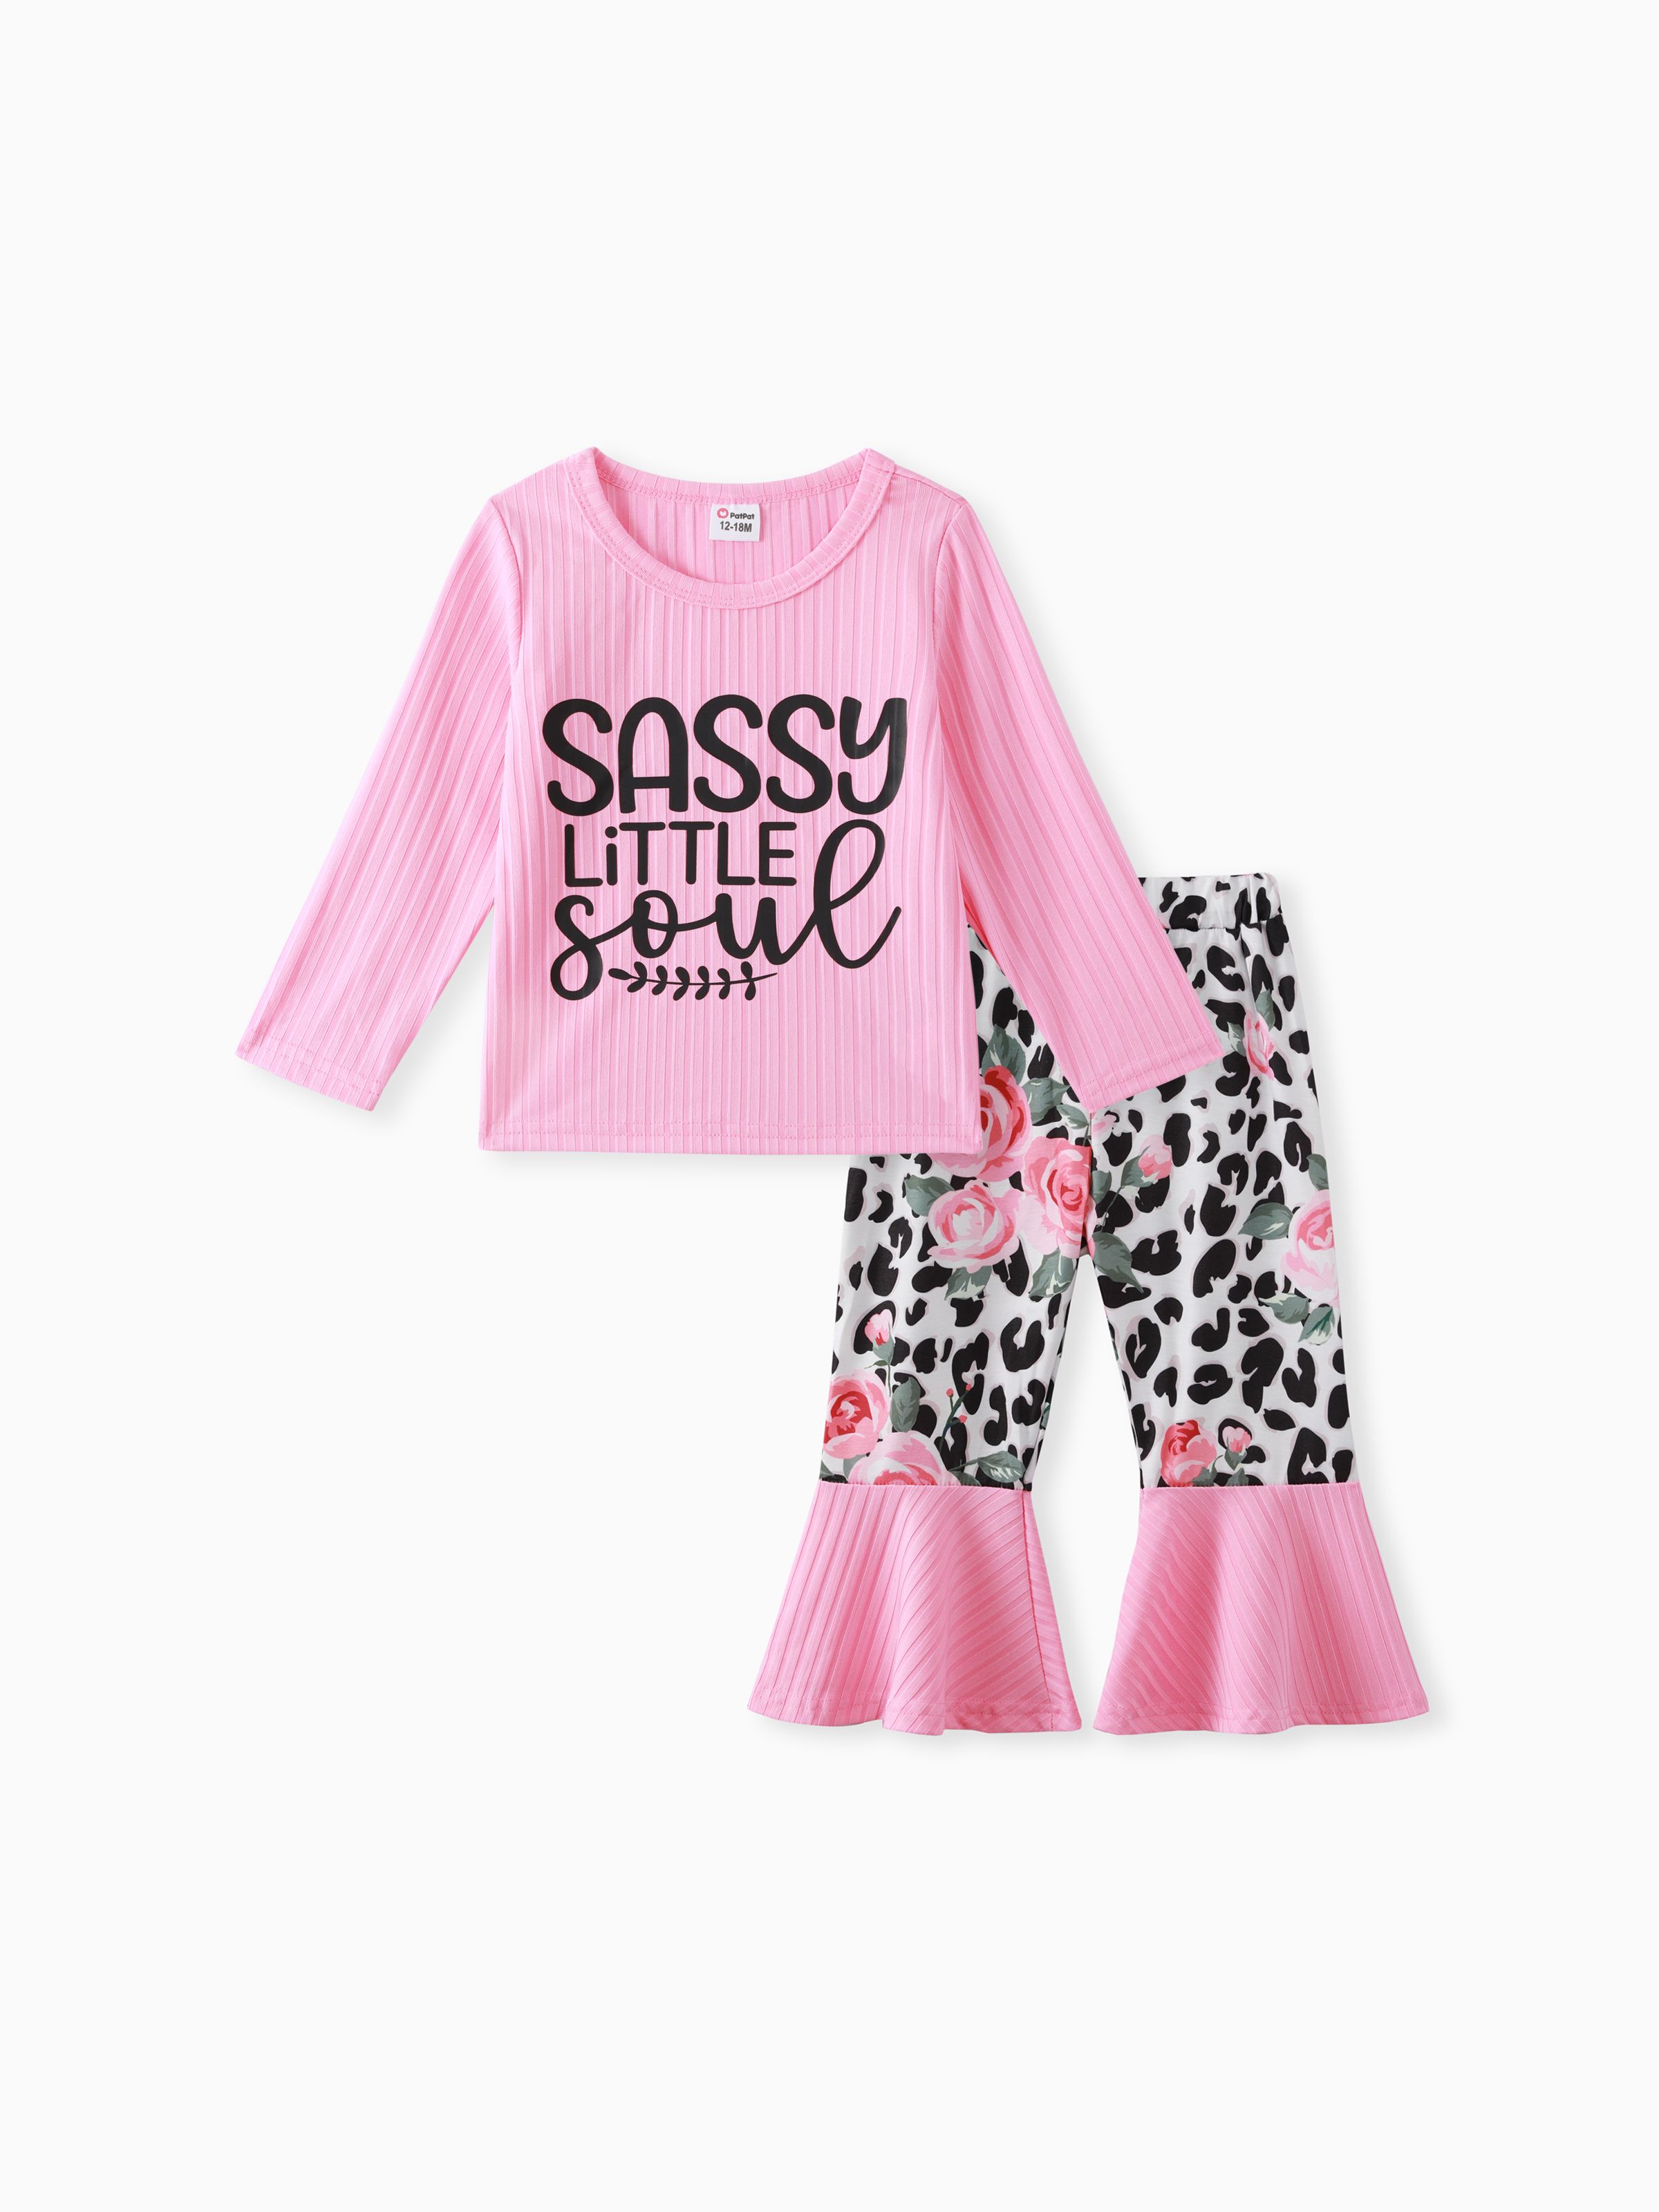 

2pcs Baby Girl Letter Print Pink Long-sleeve Ribbed Top with Leopard and Floral Print Bell Bottom Pants Set